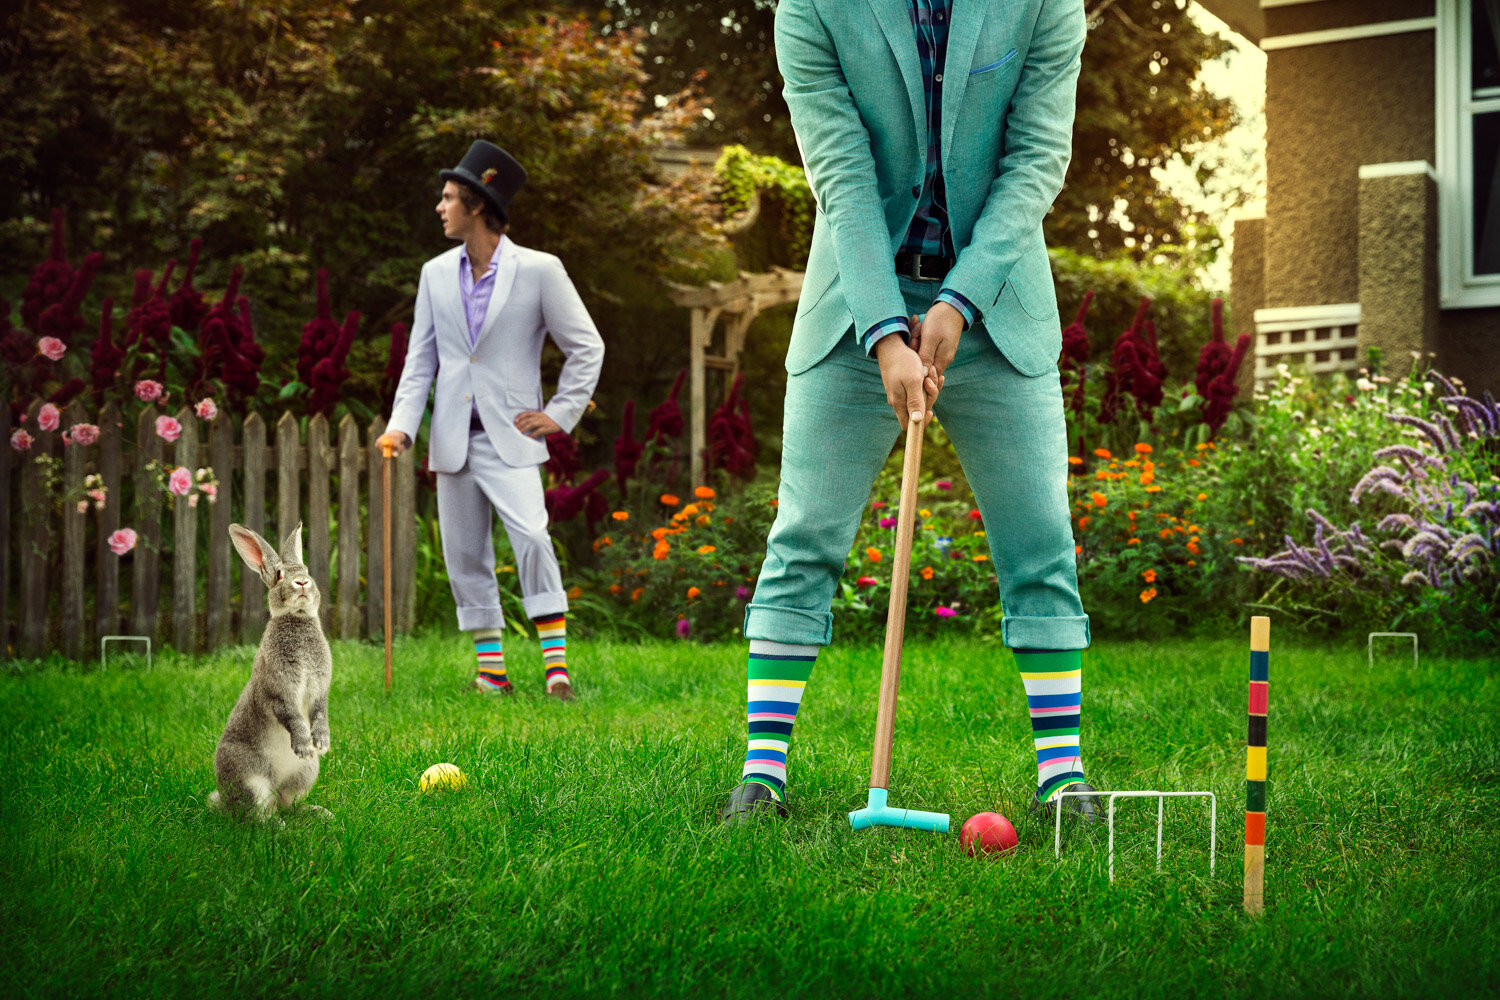 conceptual product photography: bunny and gentlemen in suits playing crocket with walking sticks and compression socks from Top &amp; Derby.